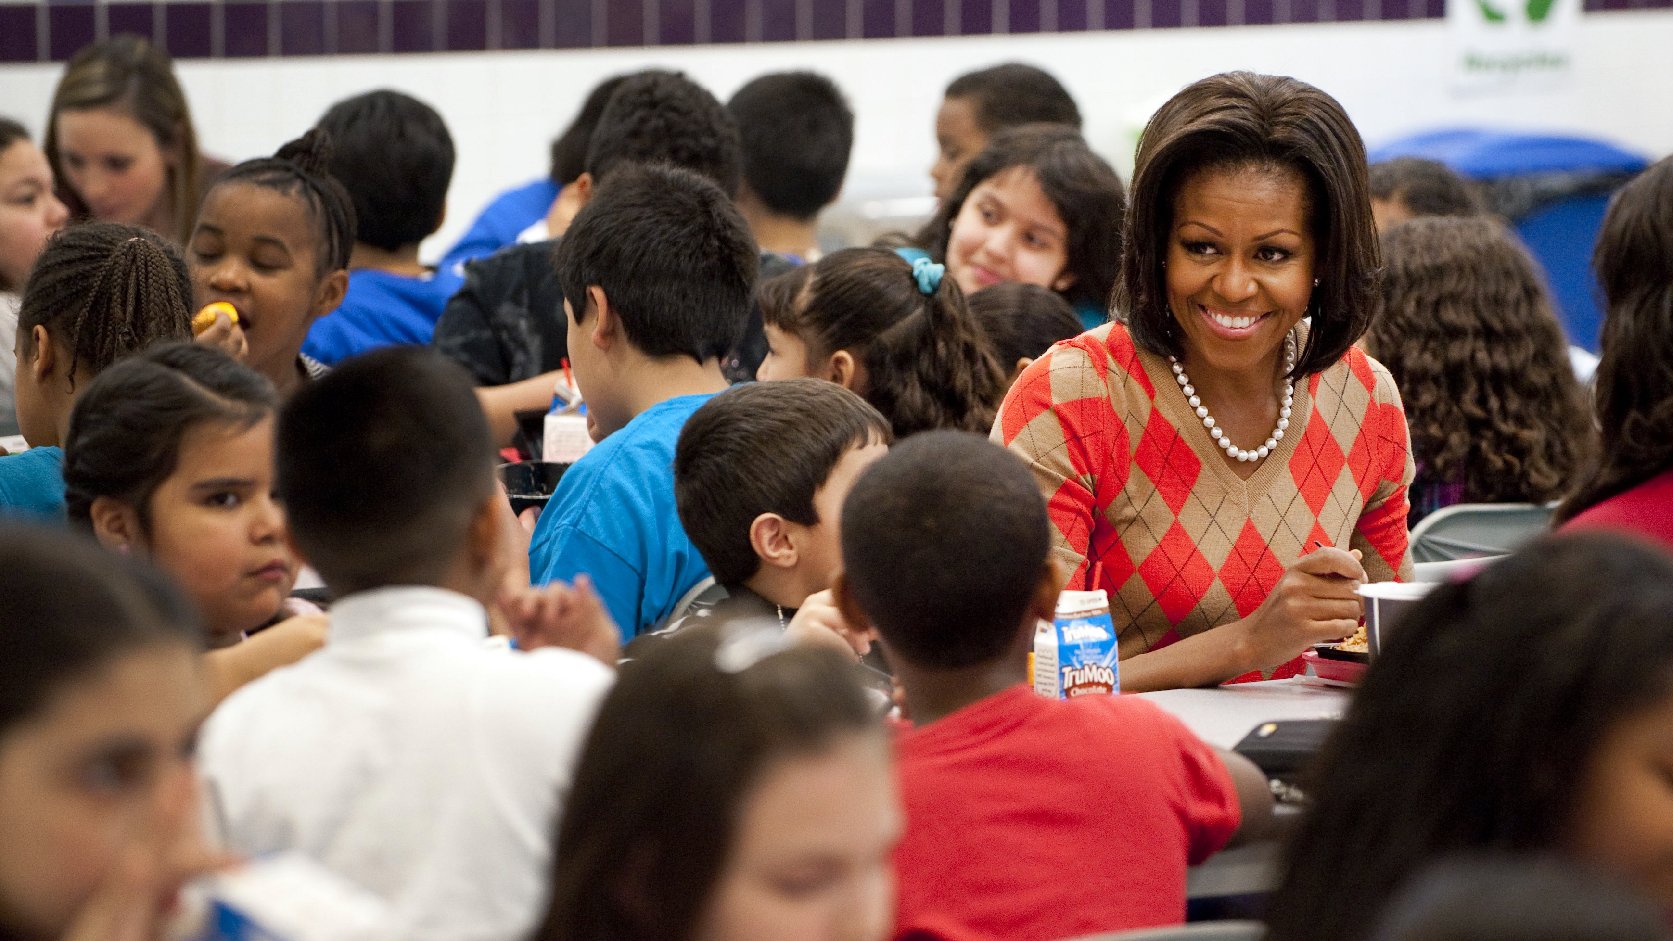 Michelle Obama eats lunch with school children at Parklawn Elementary School in Alexandria, Va., in 2012. The first lady unveiled new guidelines Tuesday aimed at cracking down on the marketing of junk food to kids during the school day. Photo: Saul Loeb/AFP/Getty Images